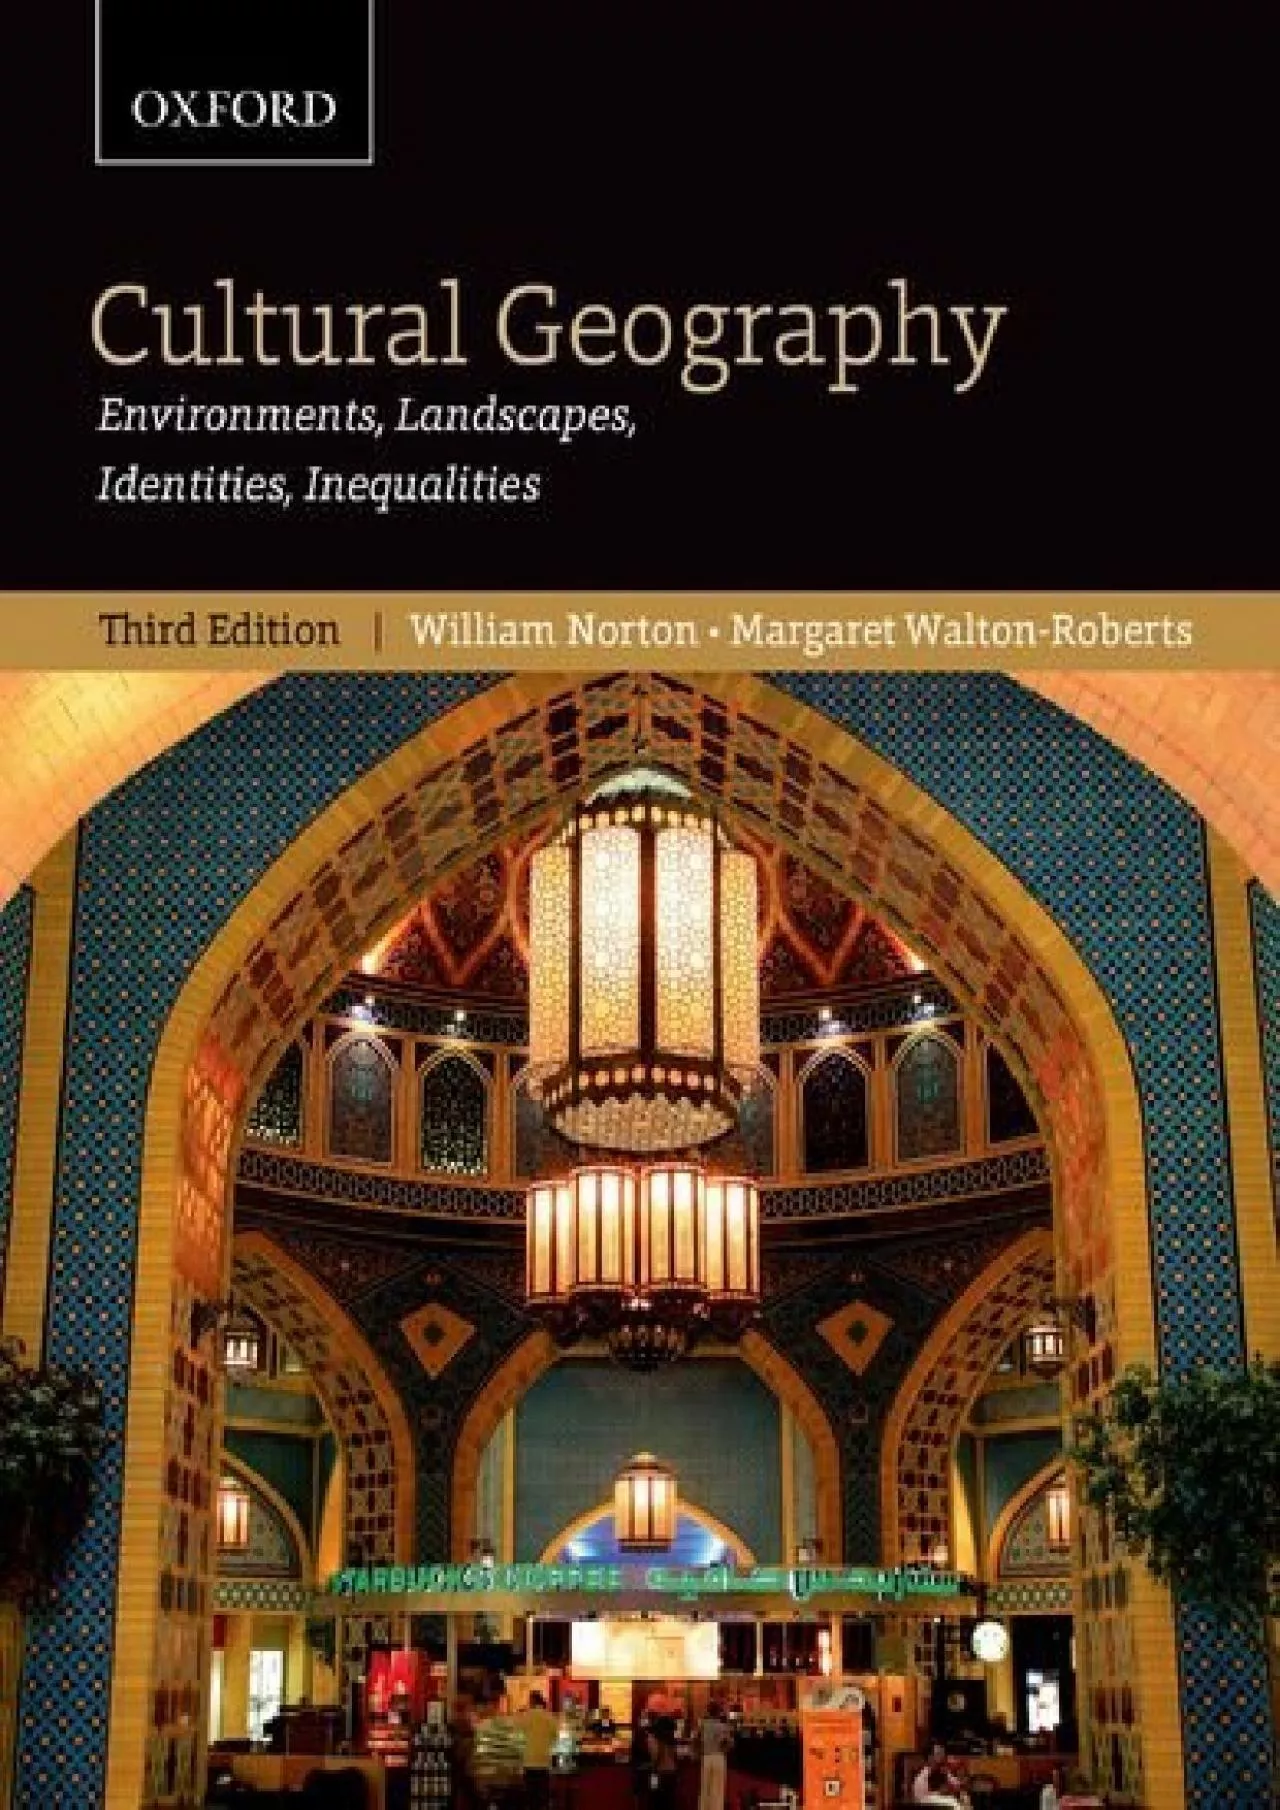 [BOOK]-Cultural Geography: Environments, Landscapes, Identities, Inequalities, third edition